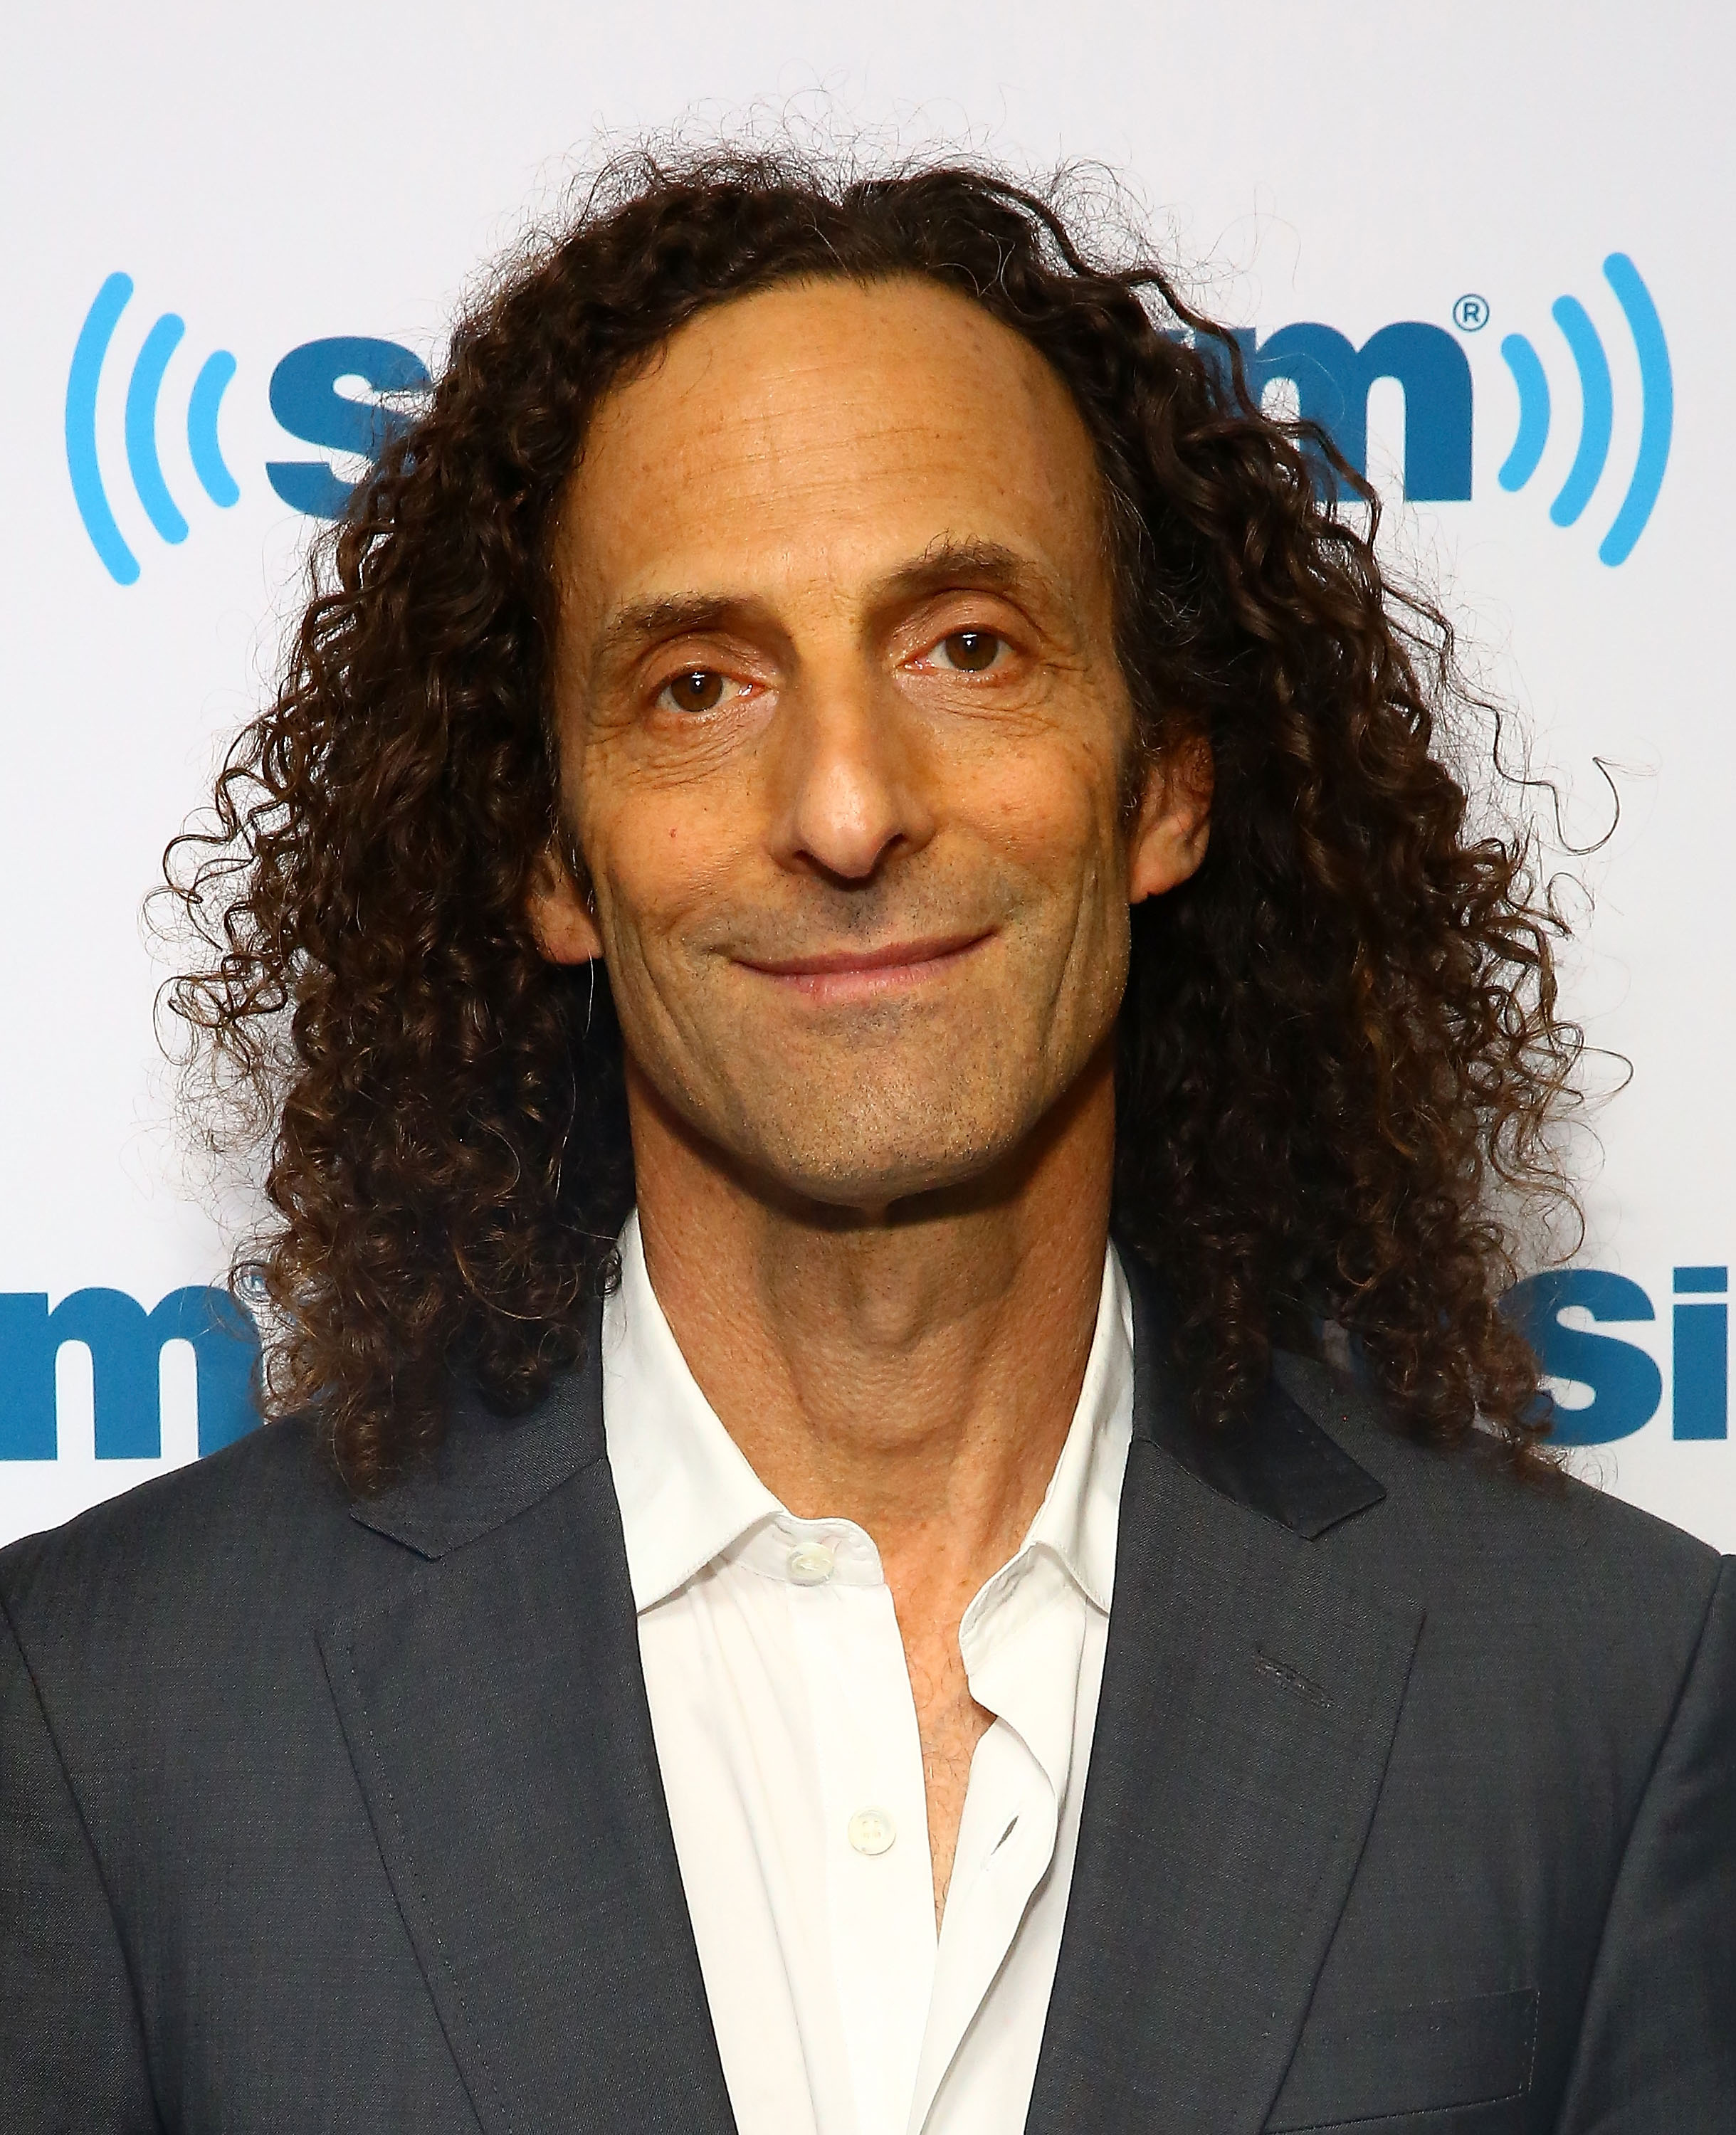 Musician Kenny G visits the SiriusXM Studios on Jan. 28, 2015 in New York City. (Astrid Stawiarz — Getty Images)